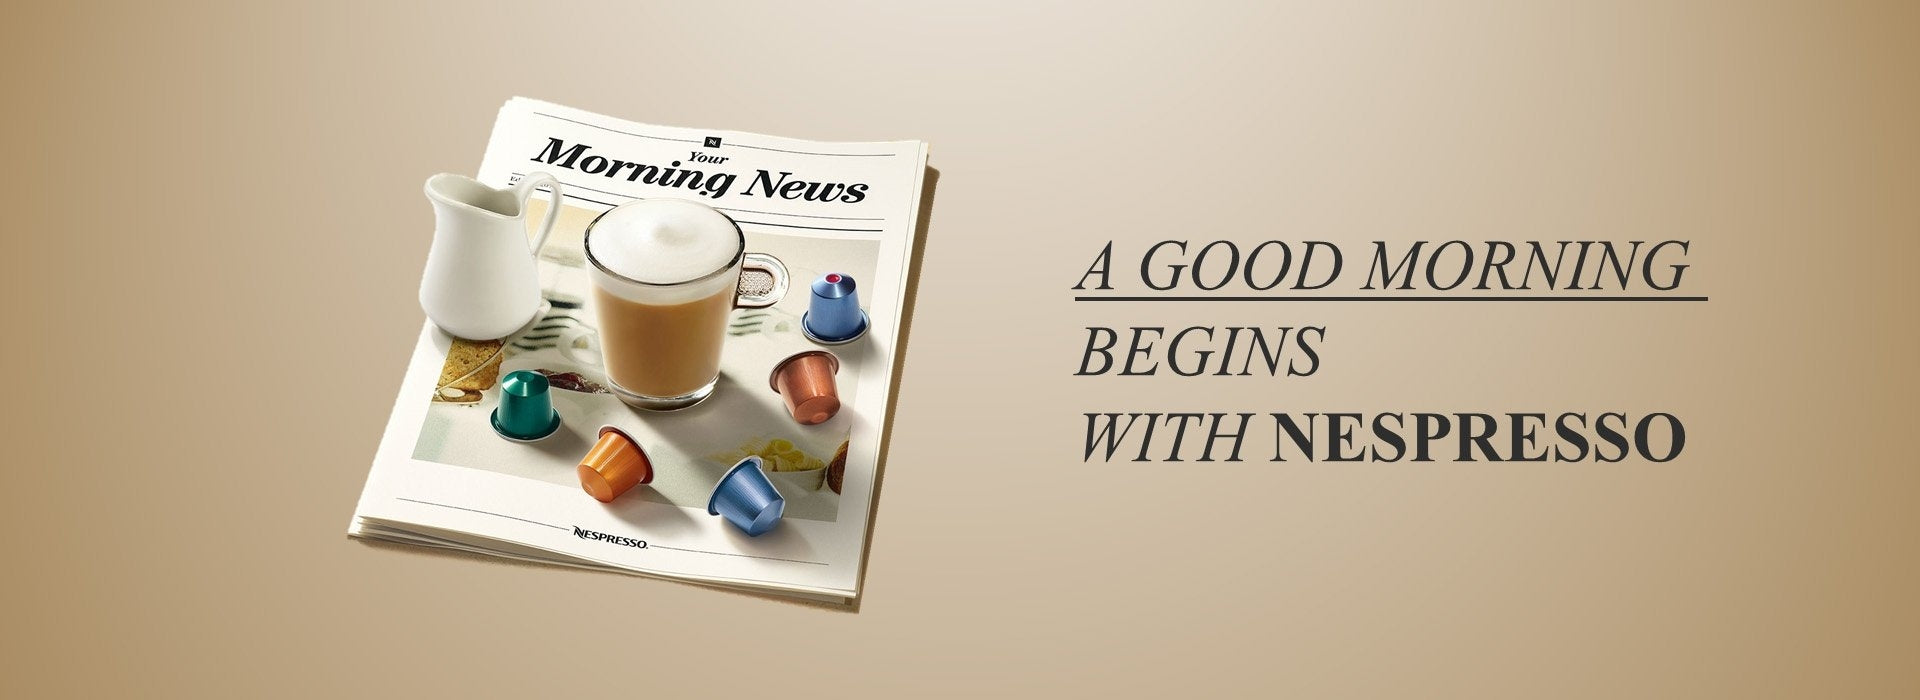 A Good Morning begings with Nespresso